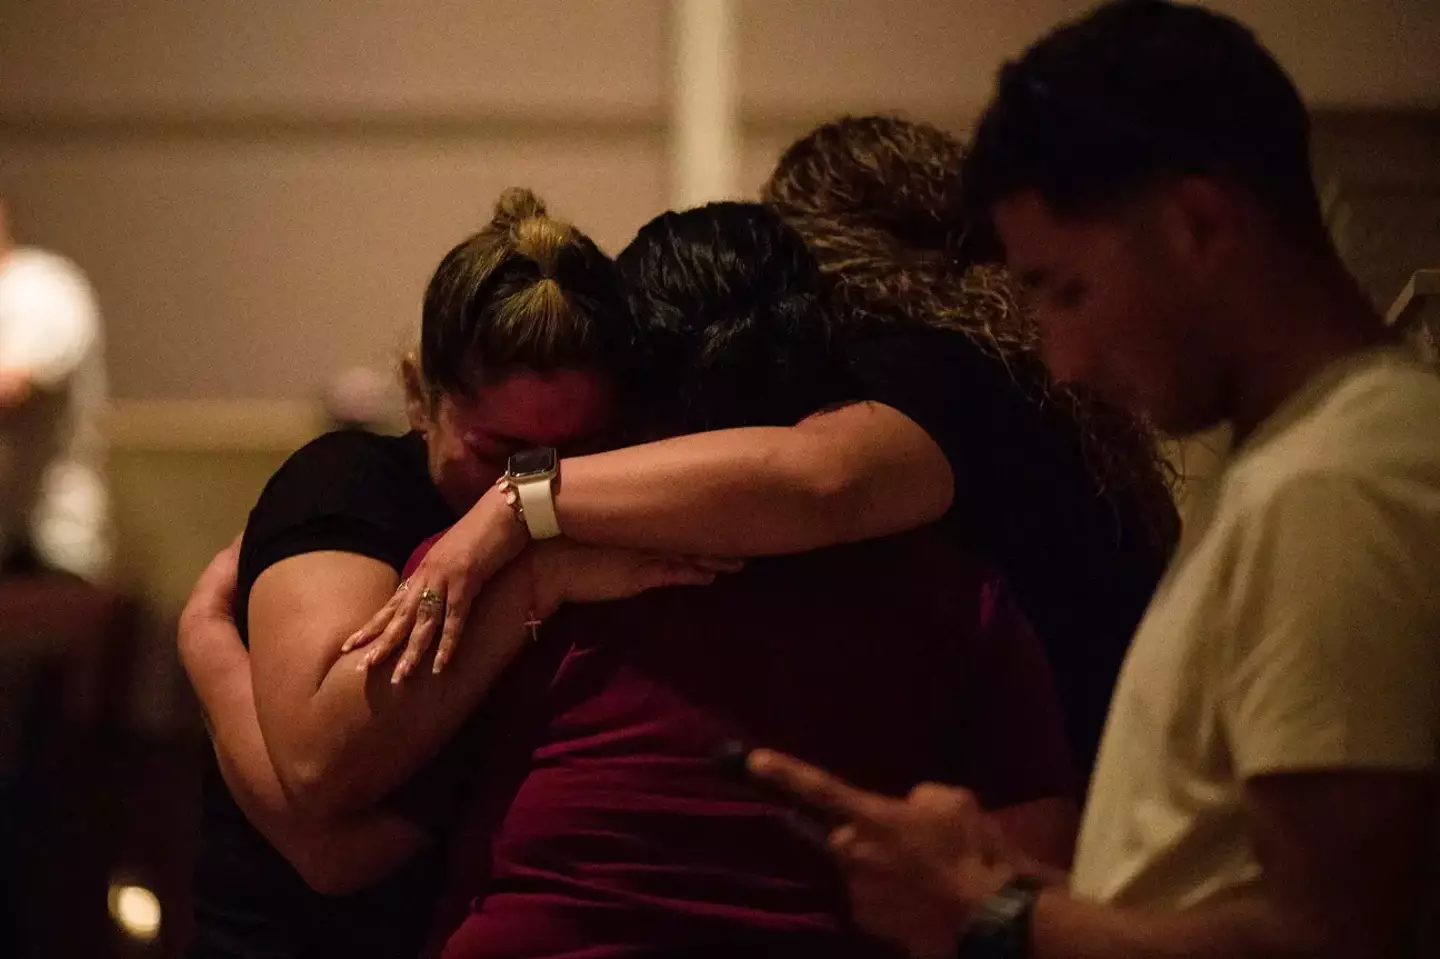 At least 21 people - including 19 children - were killed in the Uvalde attack.